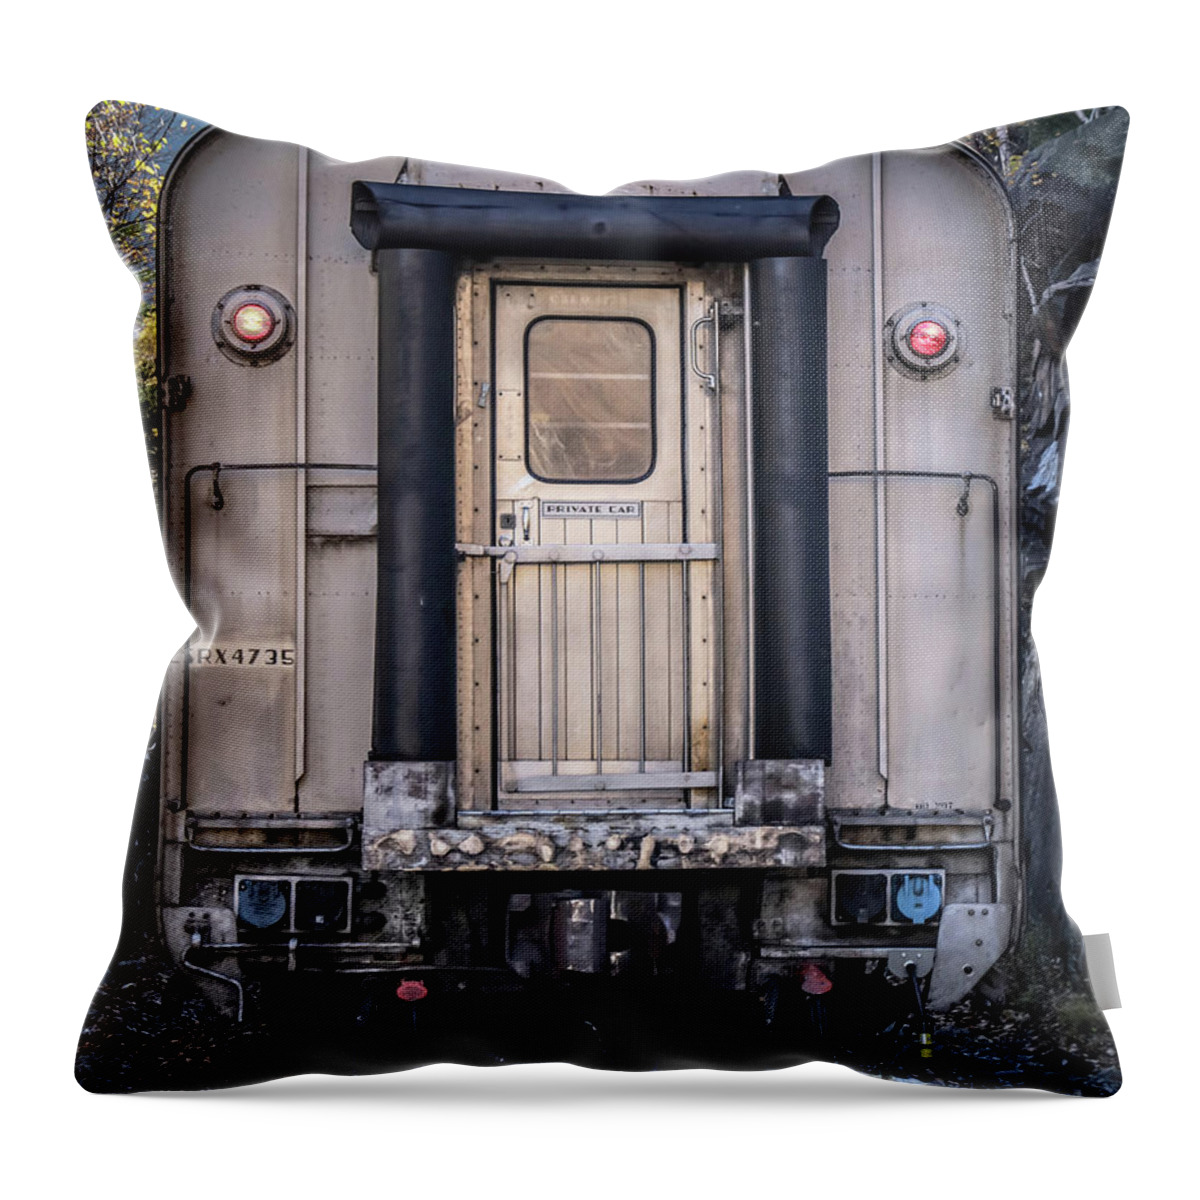 Train Throw Pillow featuring the photograph Vintage Passenger Car Conway Scene Railroad by Edward Fielding